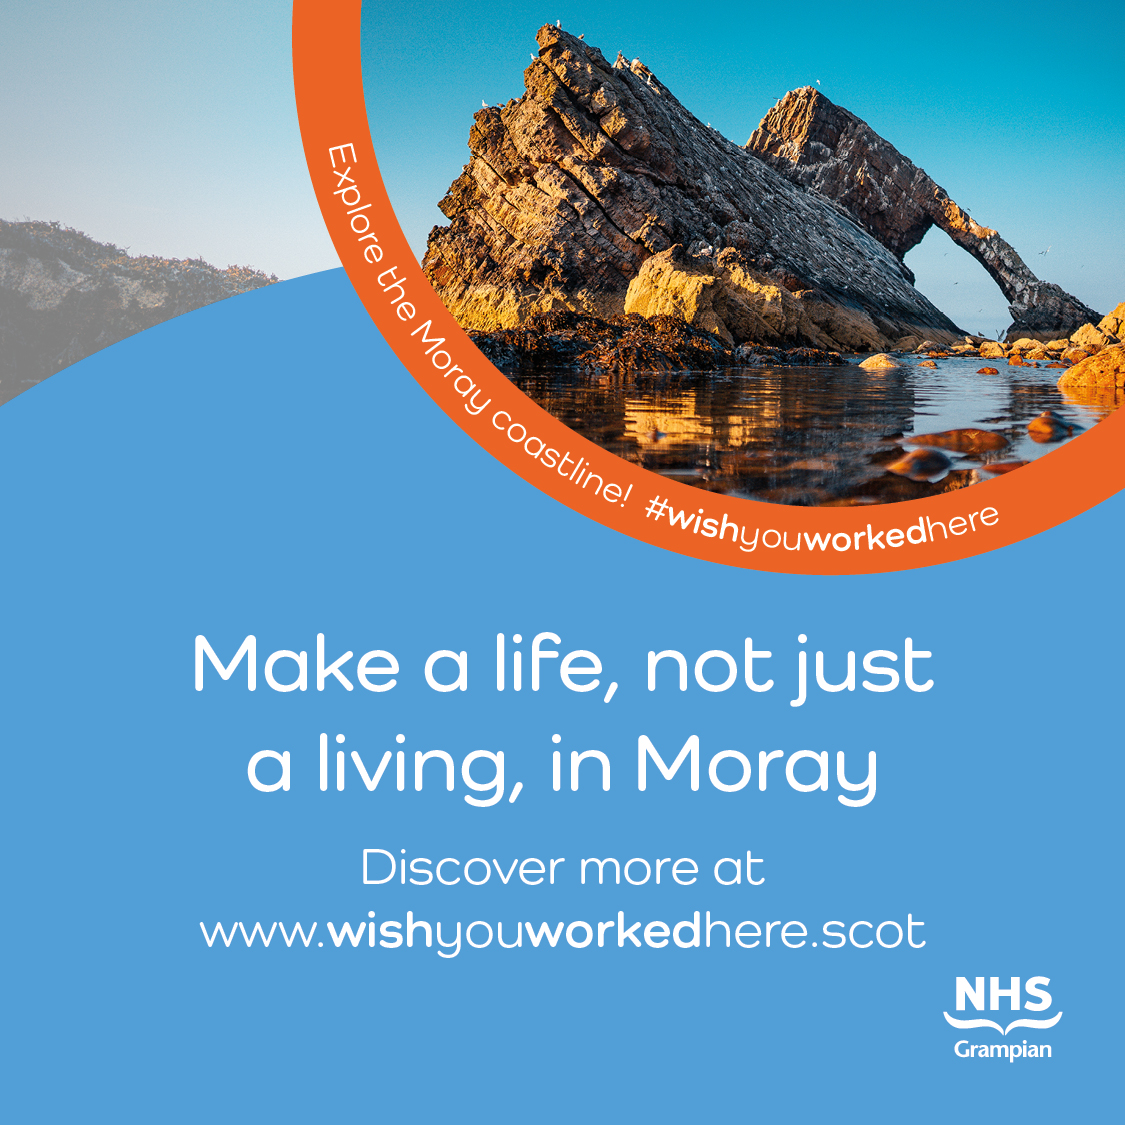 #WishYouWorkedHere Speciality Doctor for AEC. We are looking to attract candidates who are passionate about improving the care of acutely unwell medical patients as part of a dynamic and forward thinking team to shape the future of acute care in #Moray.

apply.jobs.scot.nhs.uk/Job/JobDetail?…